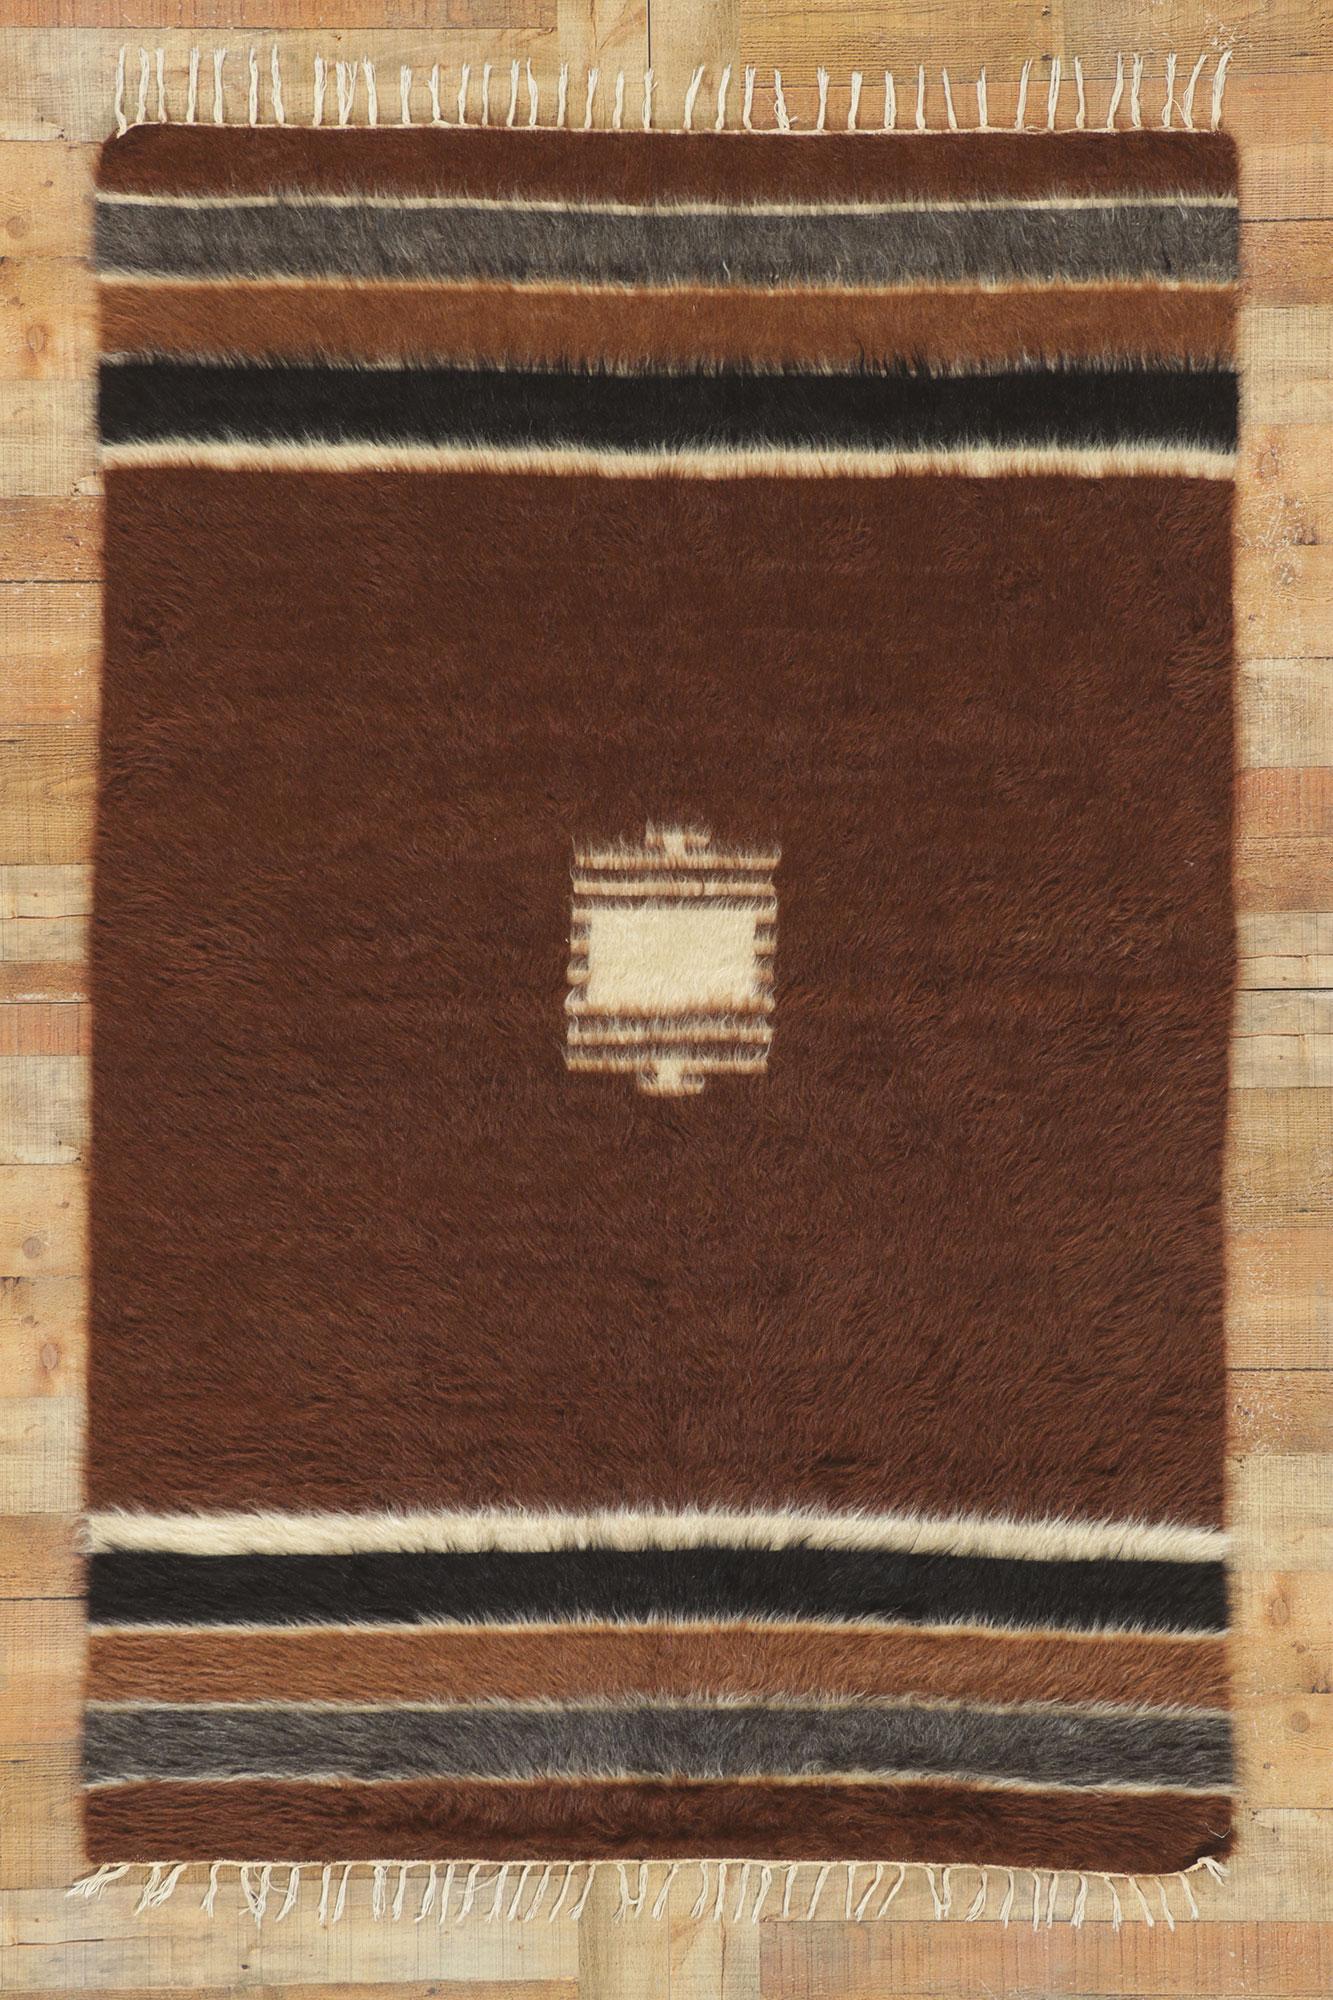 Vintage Turkish Angora Wool Blanket Kilim Rug In Good Condition For Sale In Dallas, TX